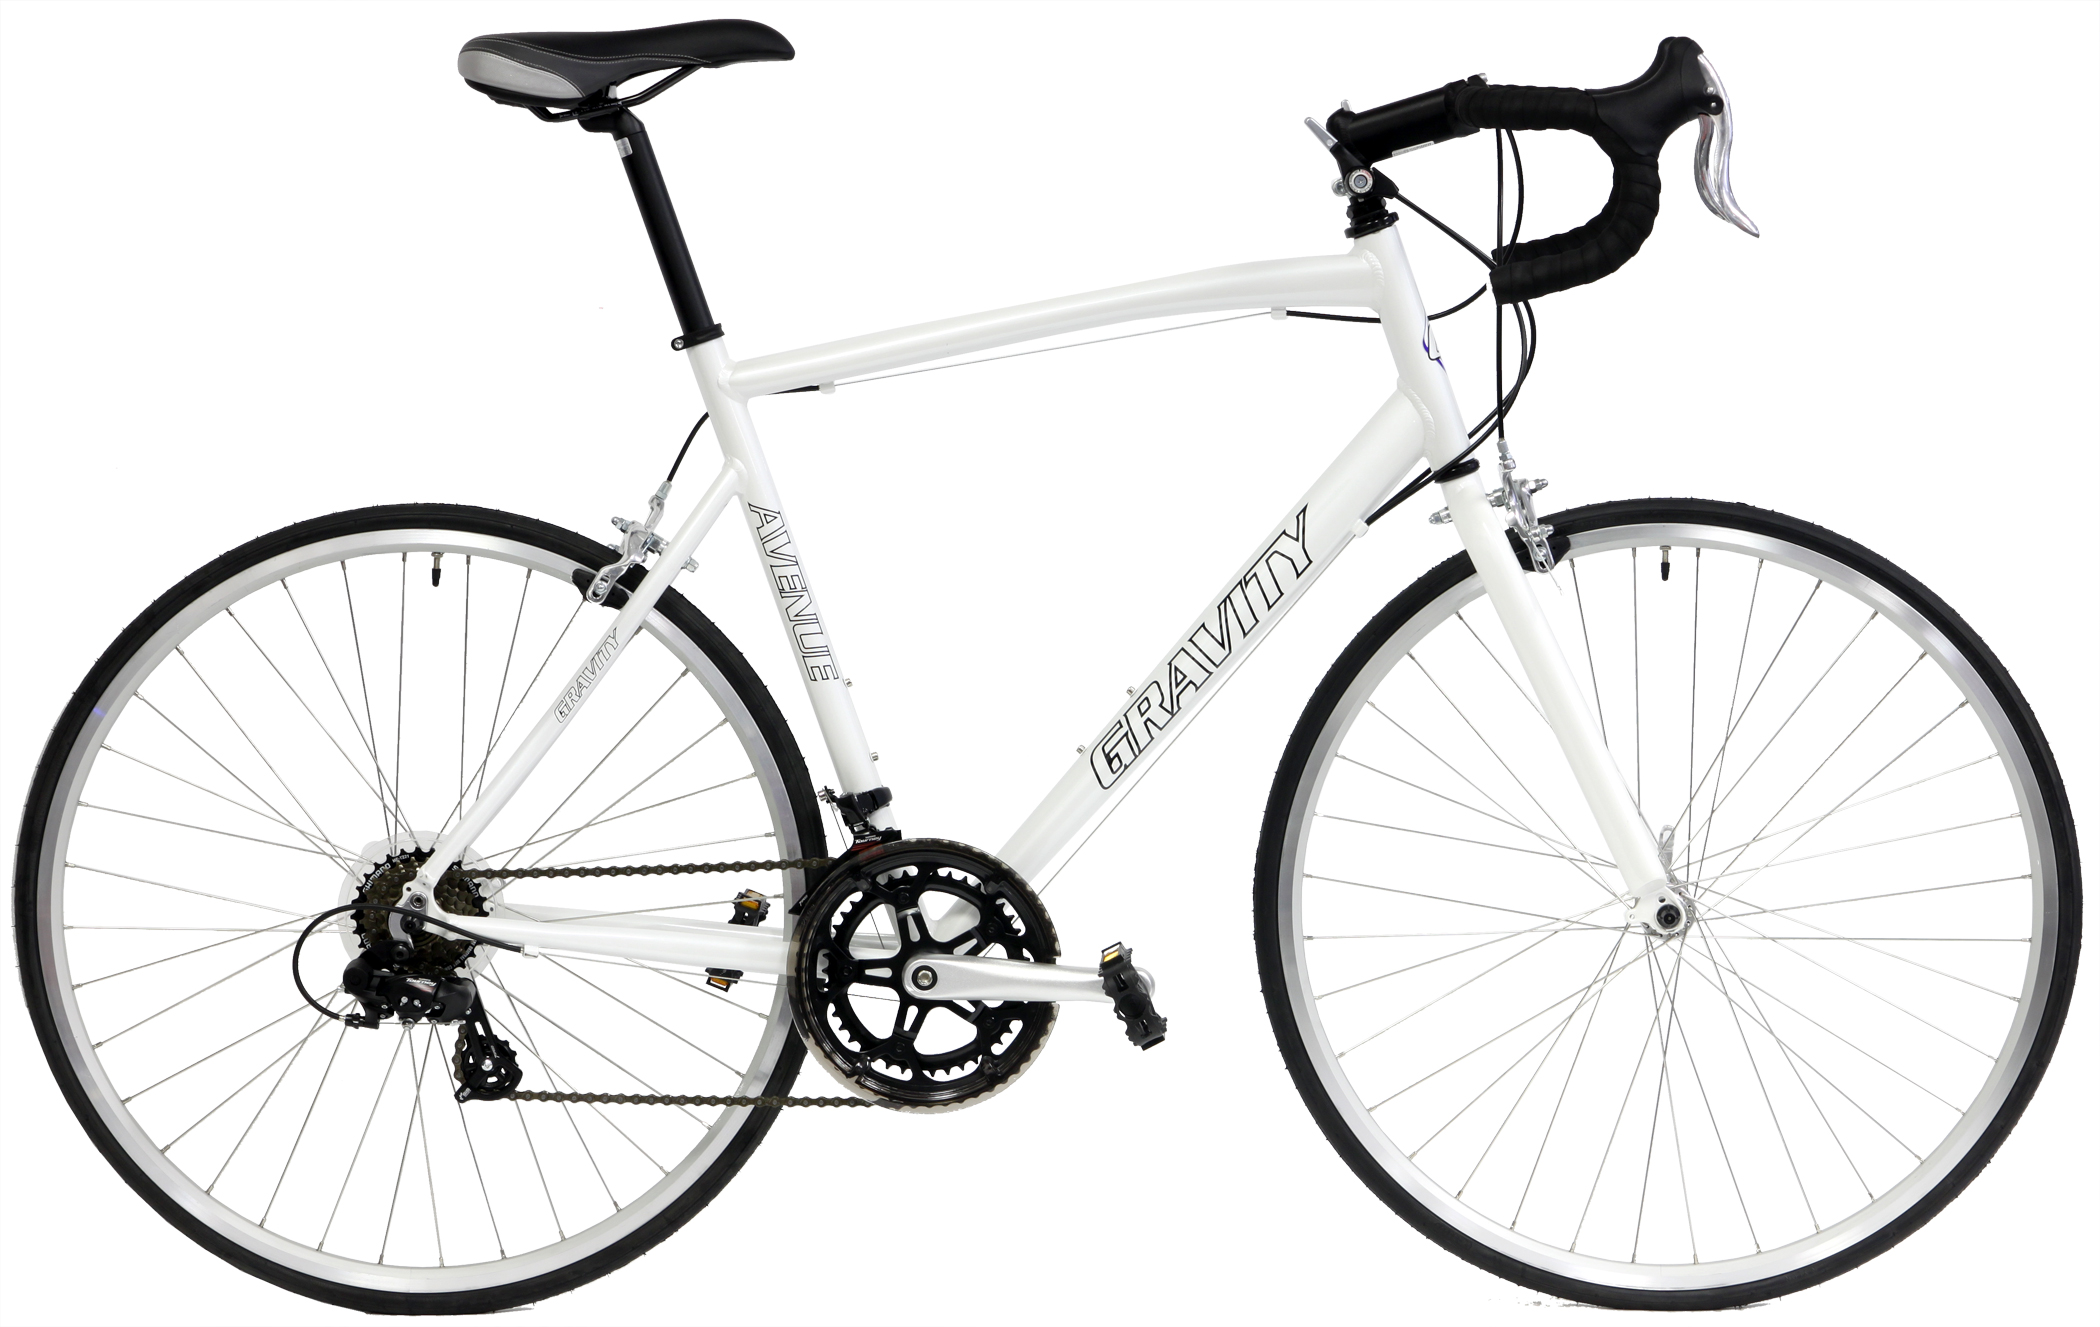 Save up to 60% off new Road Bikes